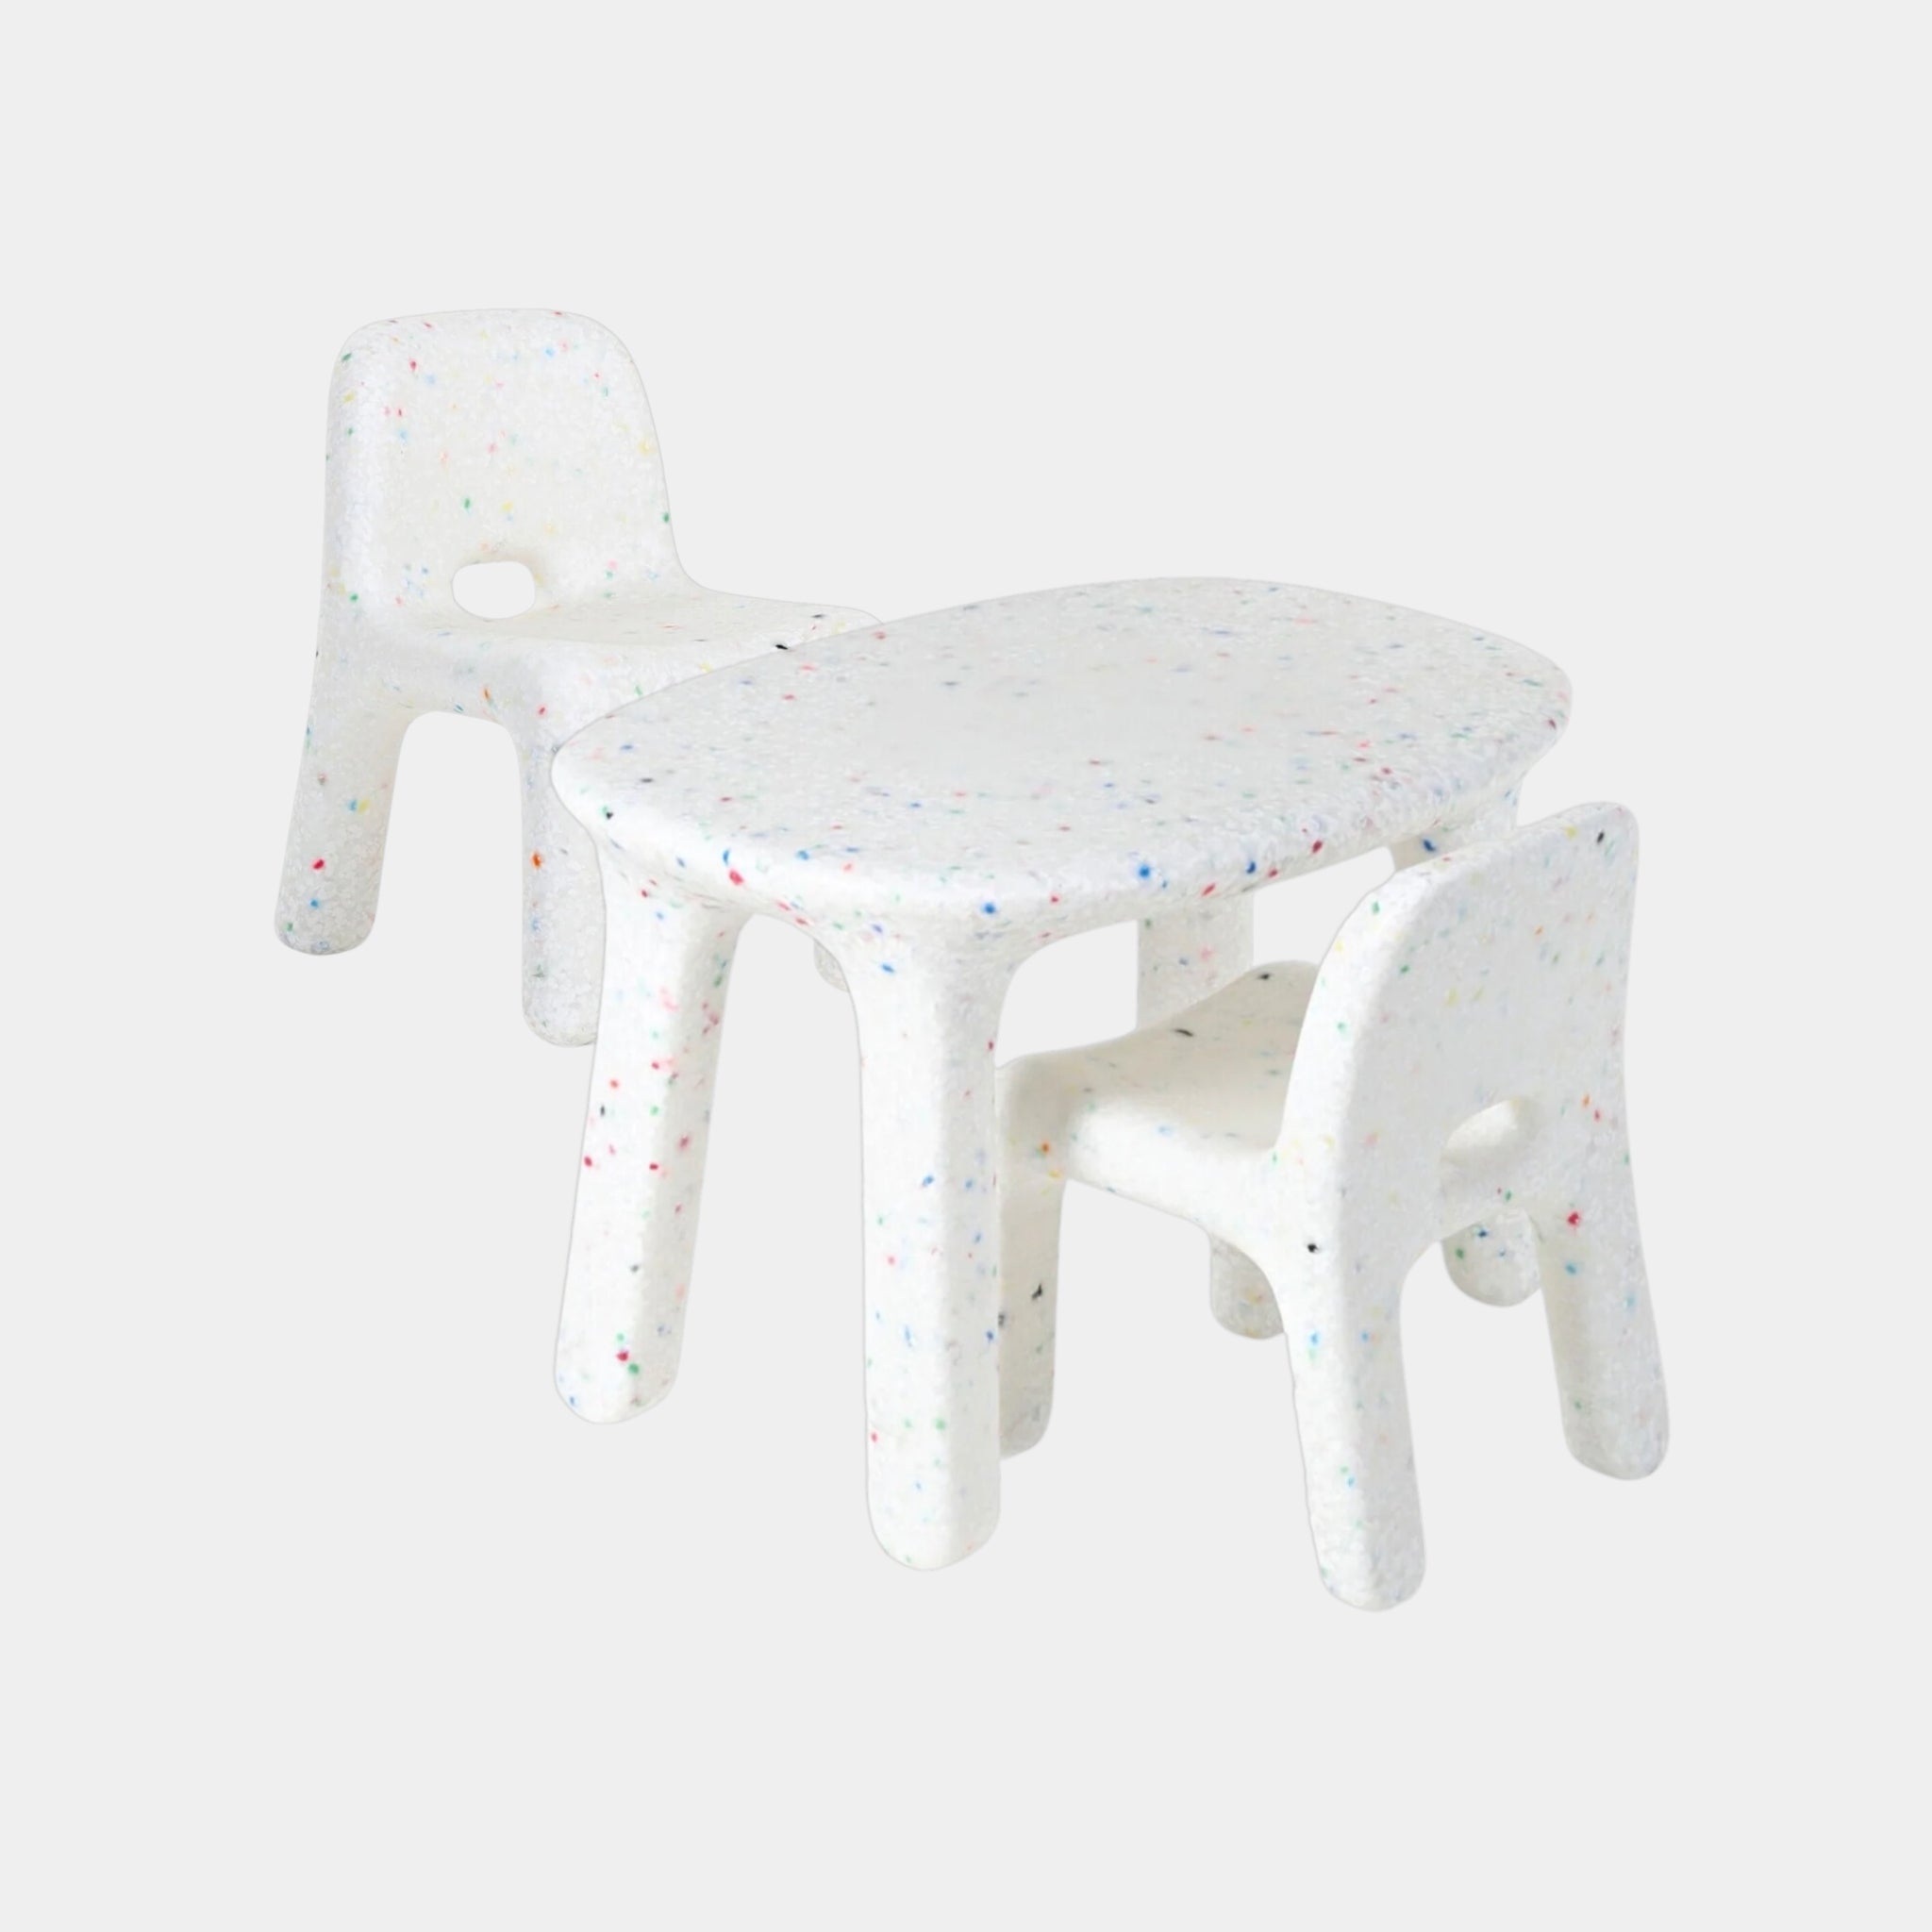 Outdoor Kid's Confetti Table - The Feelter